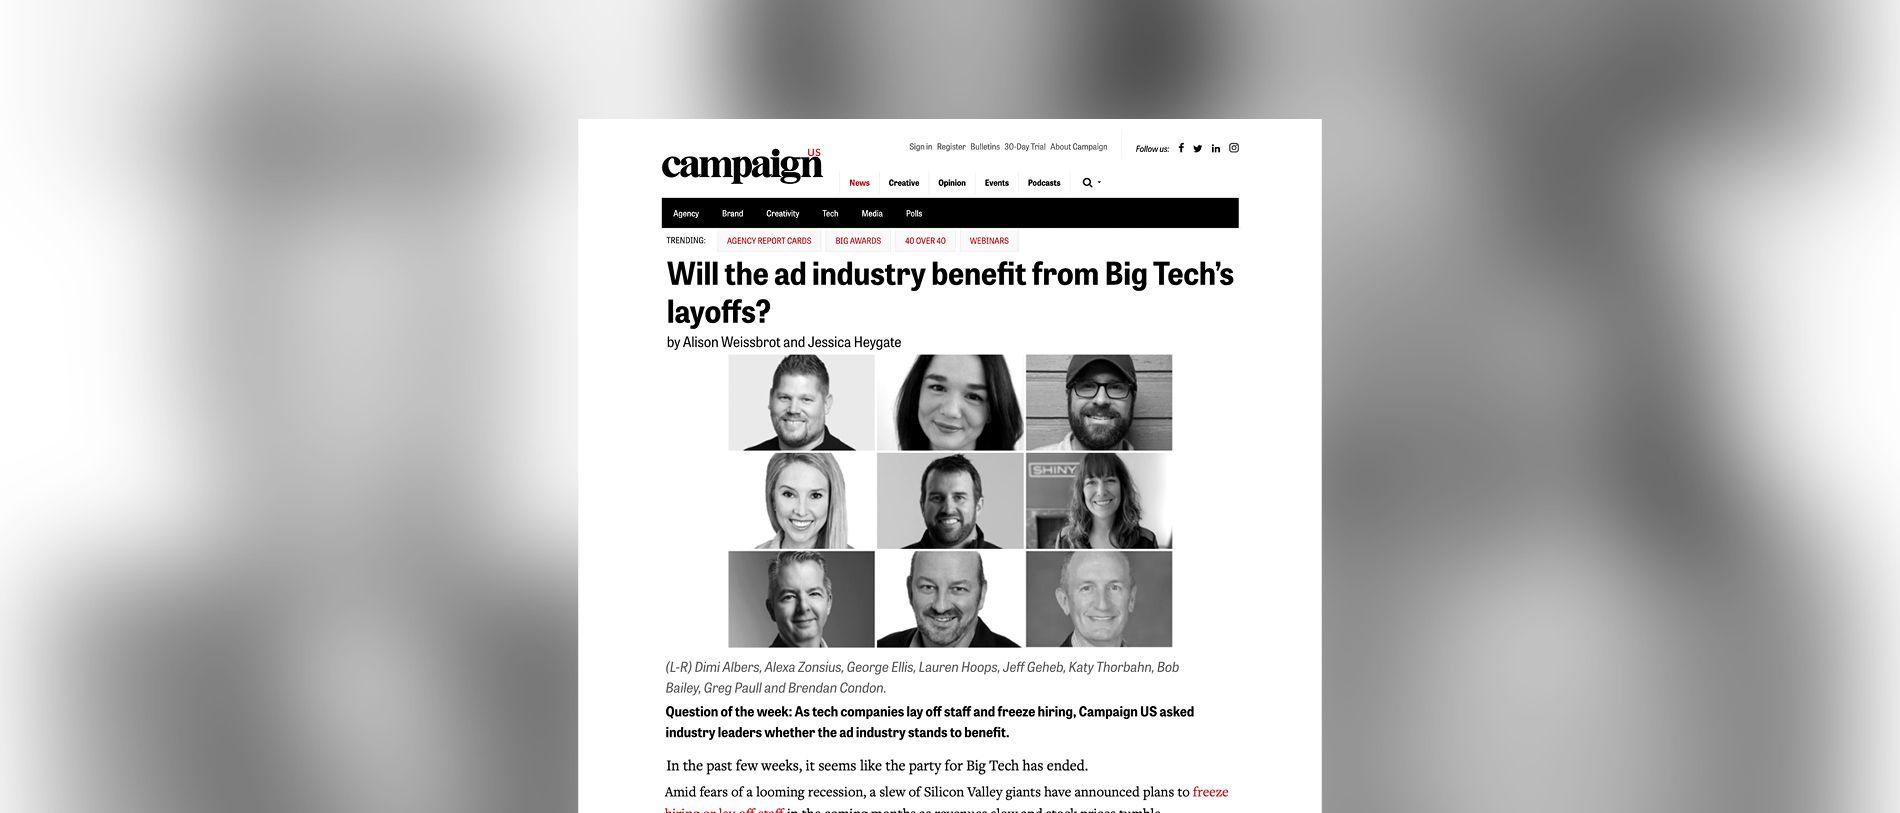 Campaign US: Will the Ad Industry Benefit from Big Tech’s Layoffs?